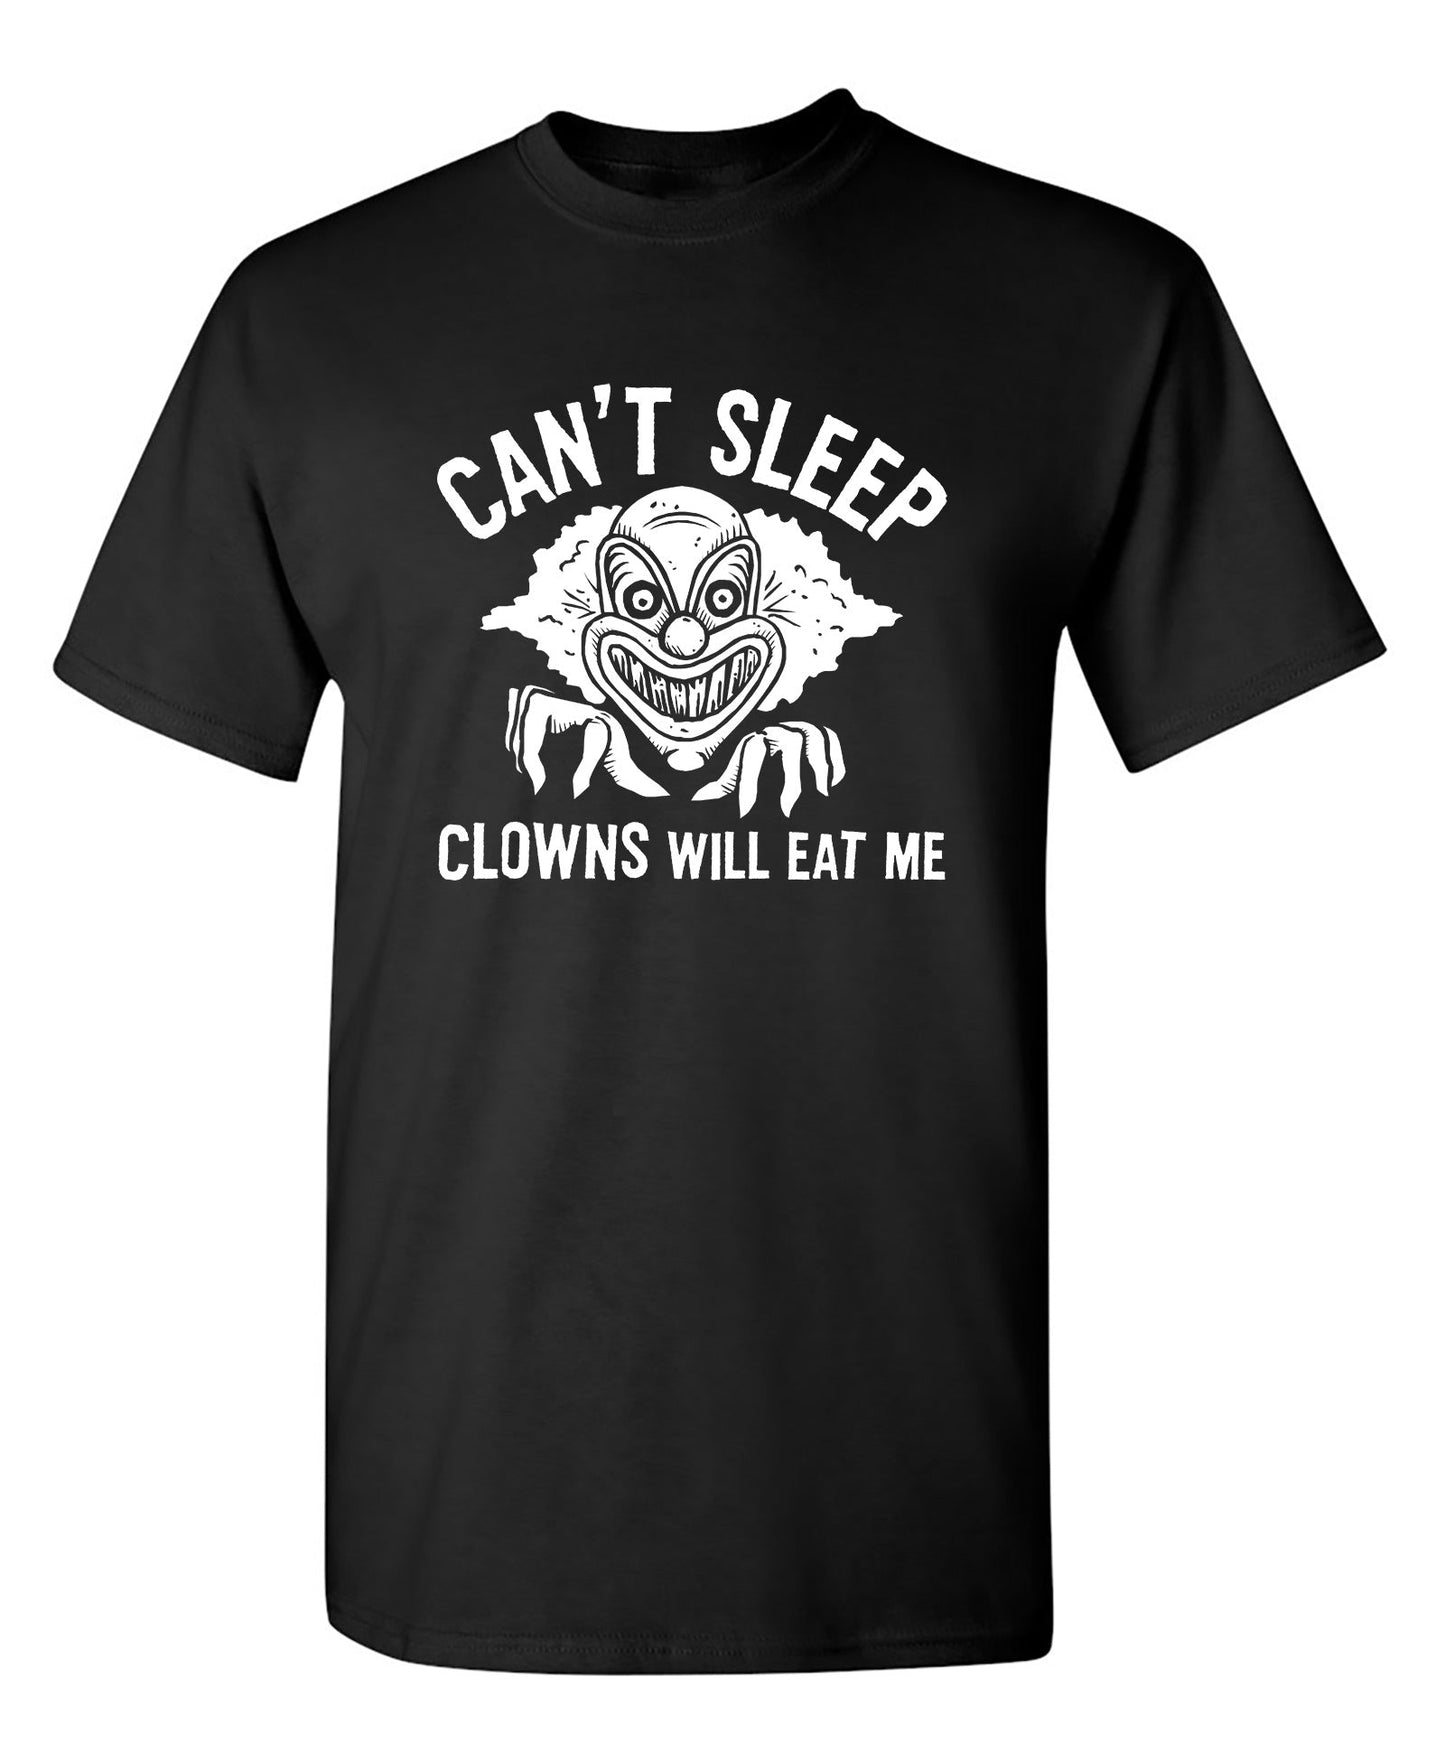 Can't Sleep, Clowns Will Eat Me - Funny T Shirts & Graphic Tees